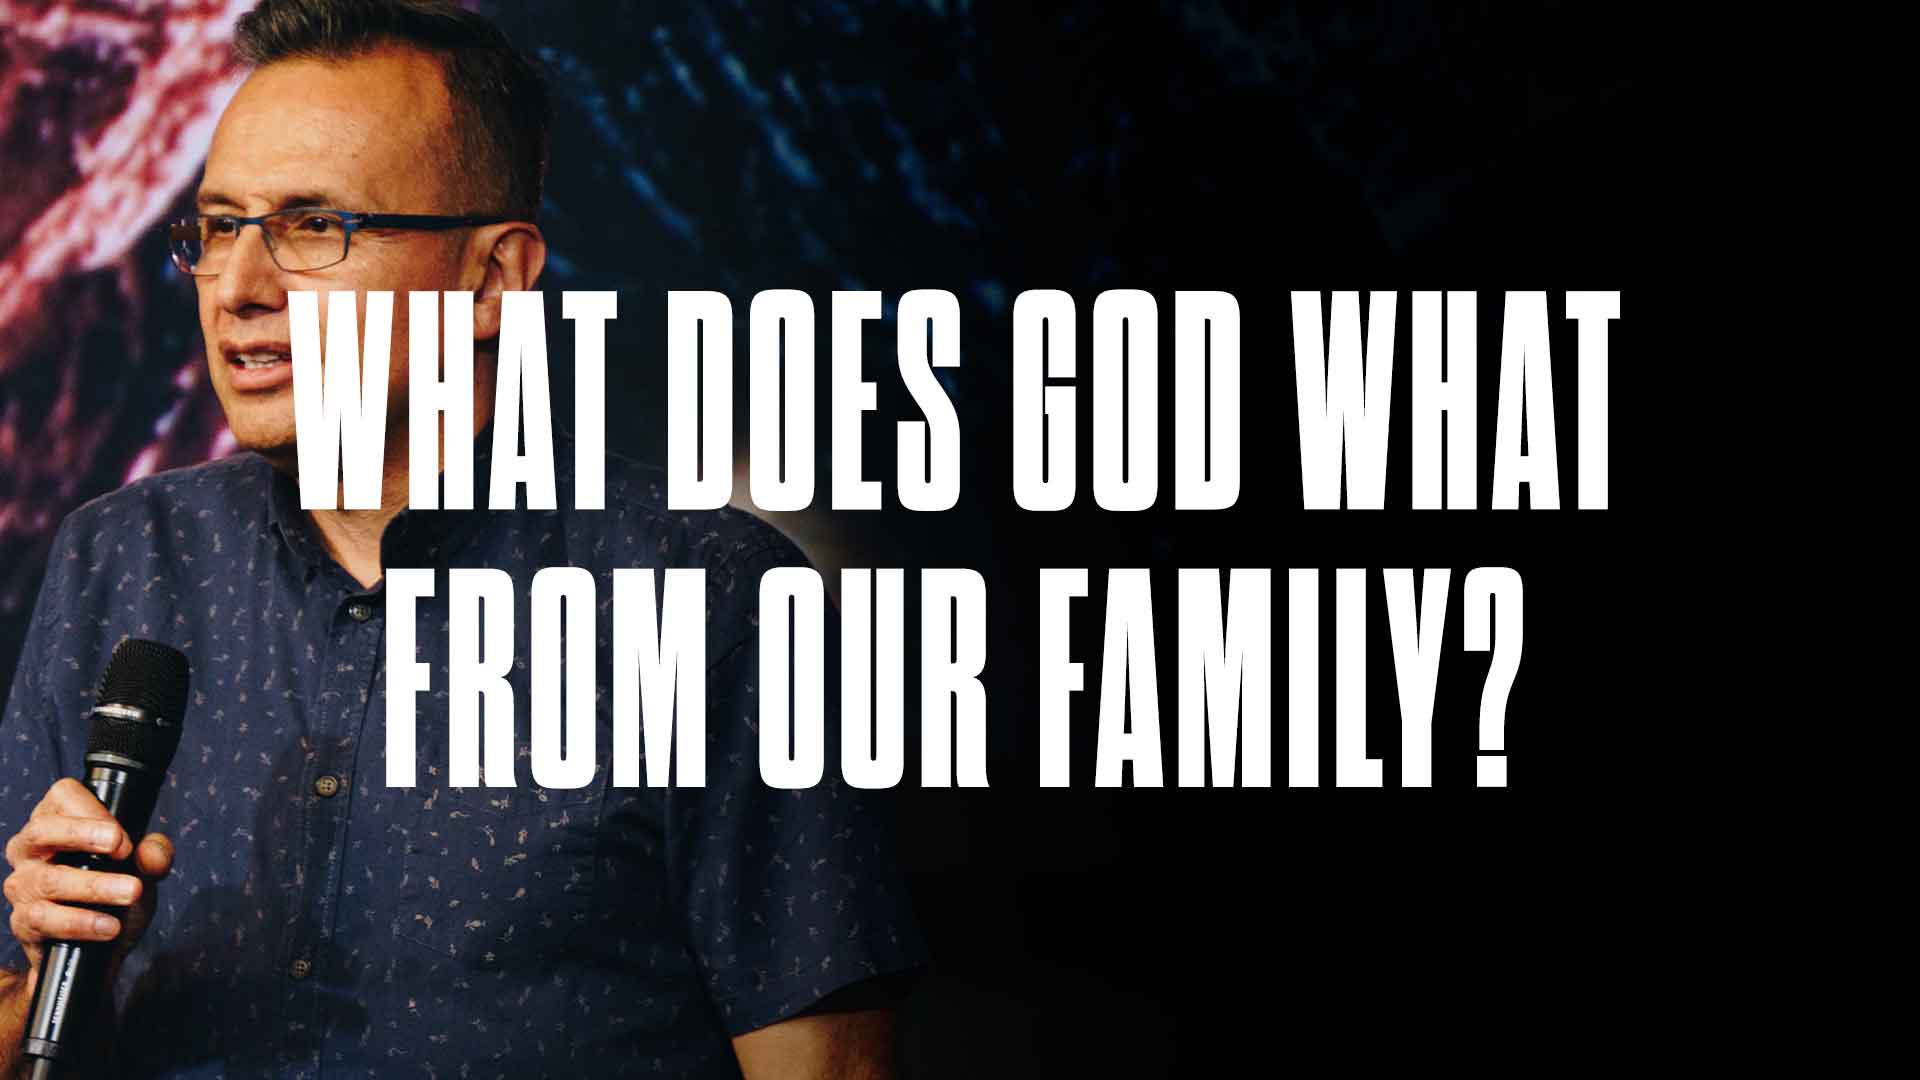 What does God want from our Family?